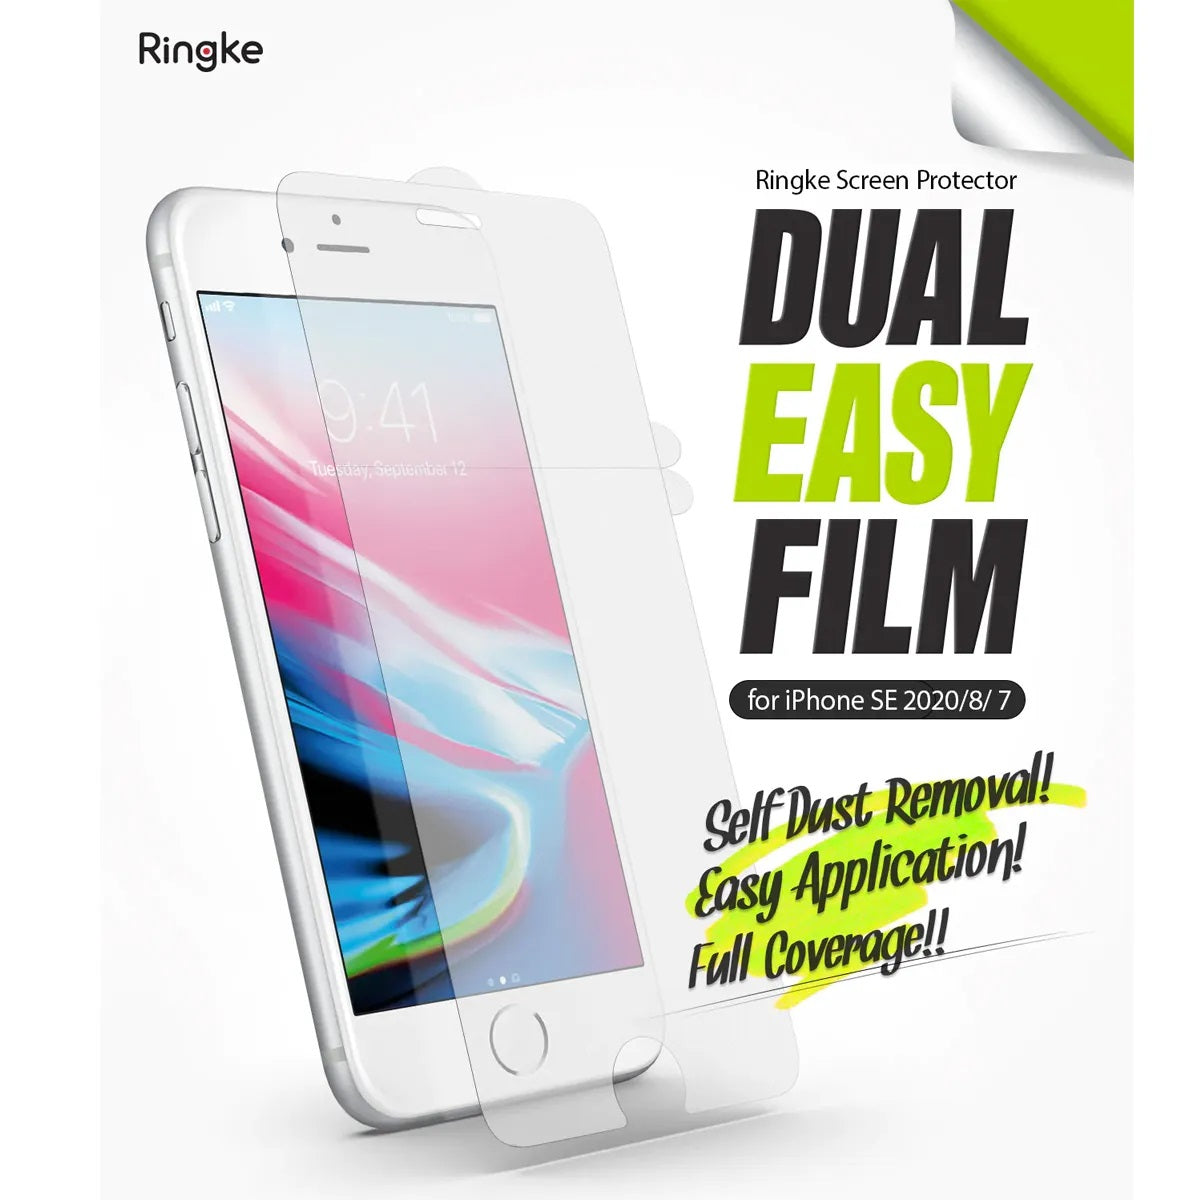 Ringke Dual Easy Film Screen Protector for iPhone SE 2020/2022